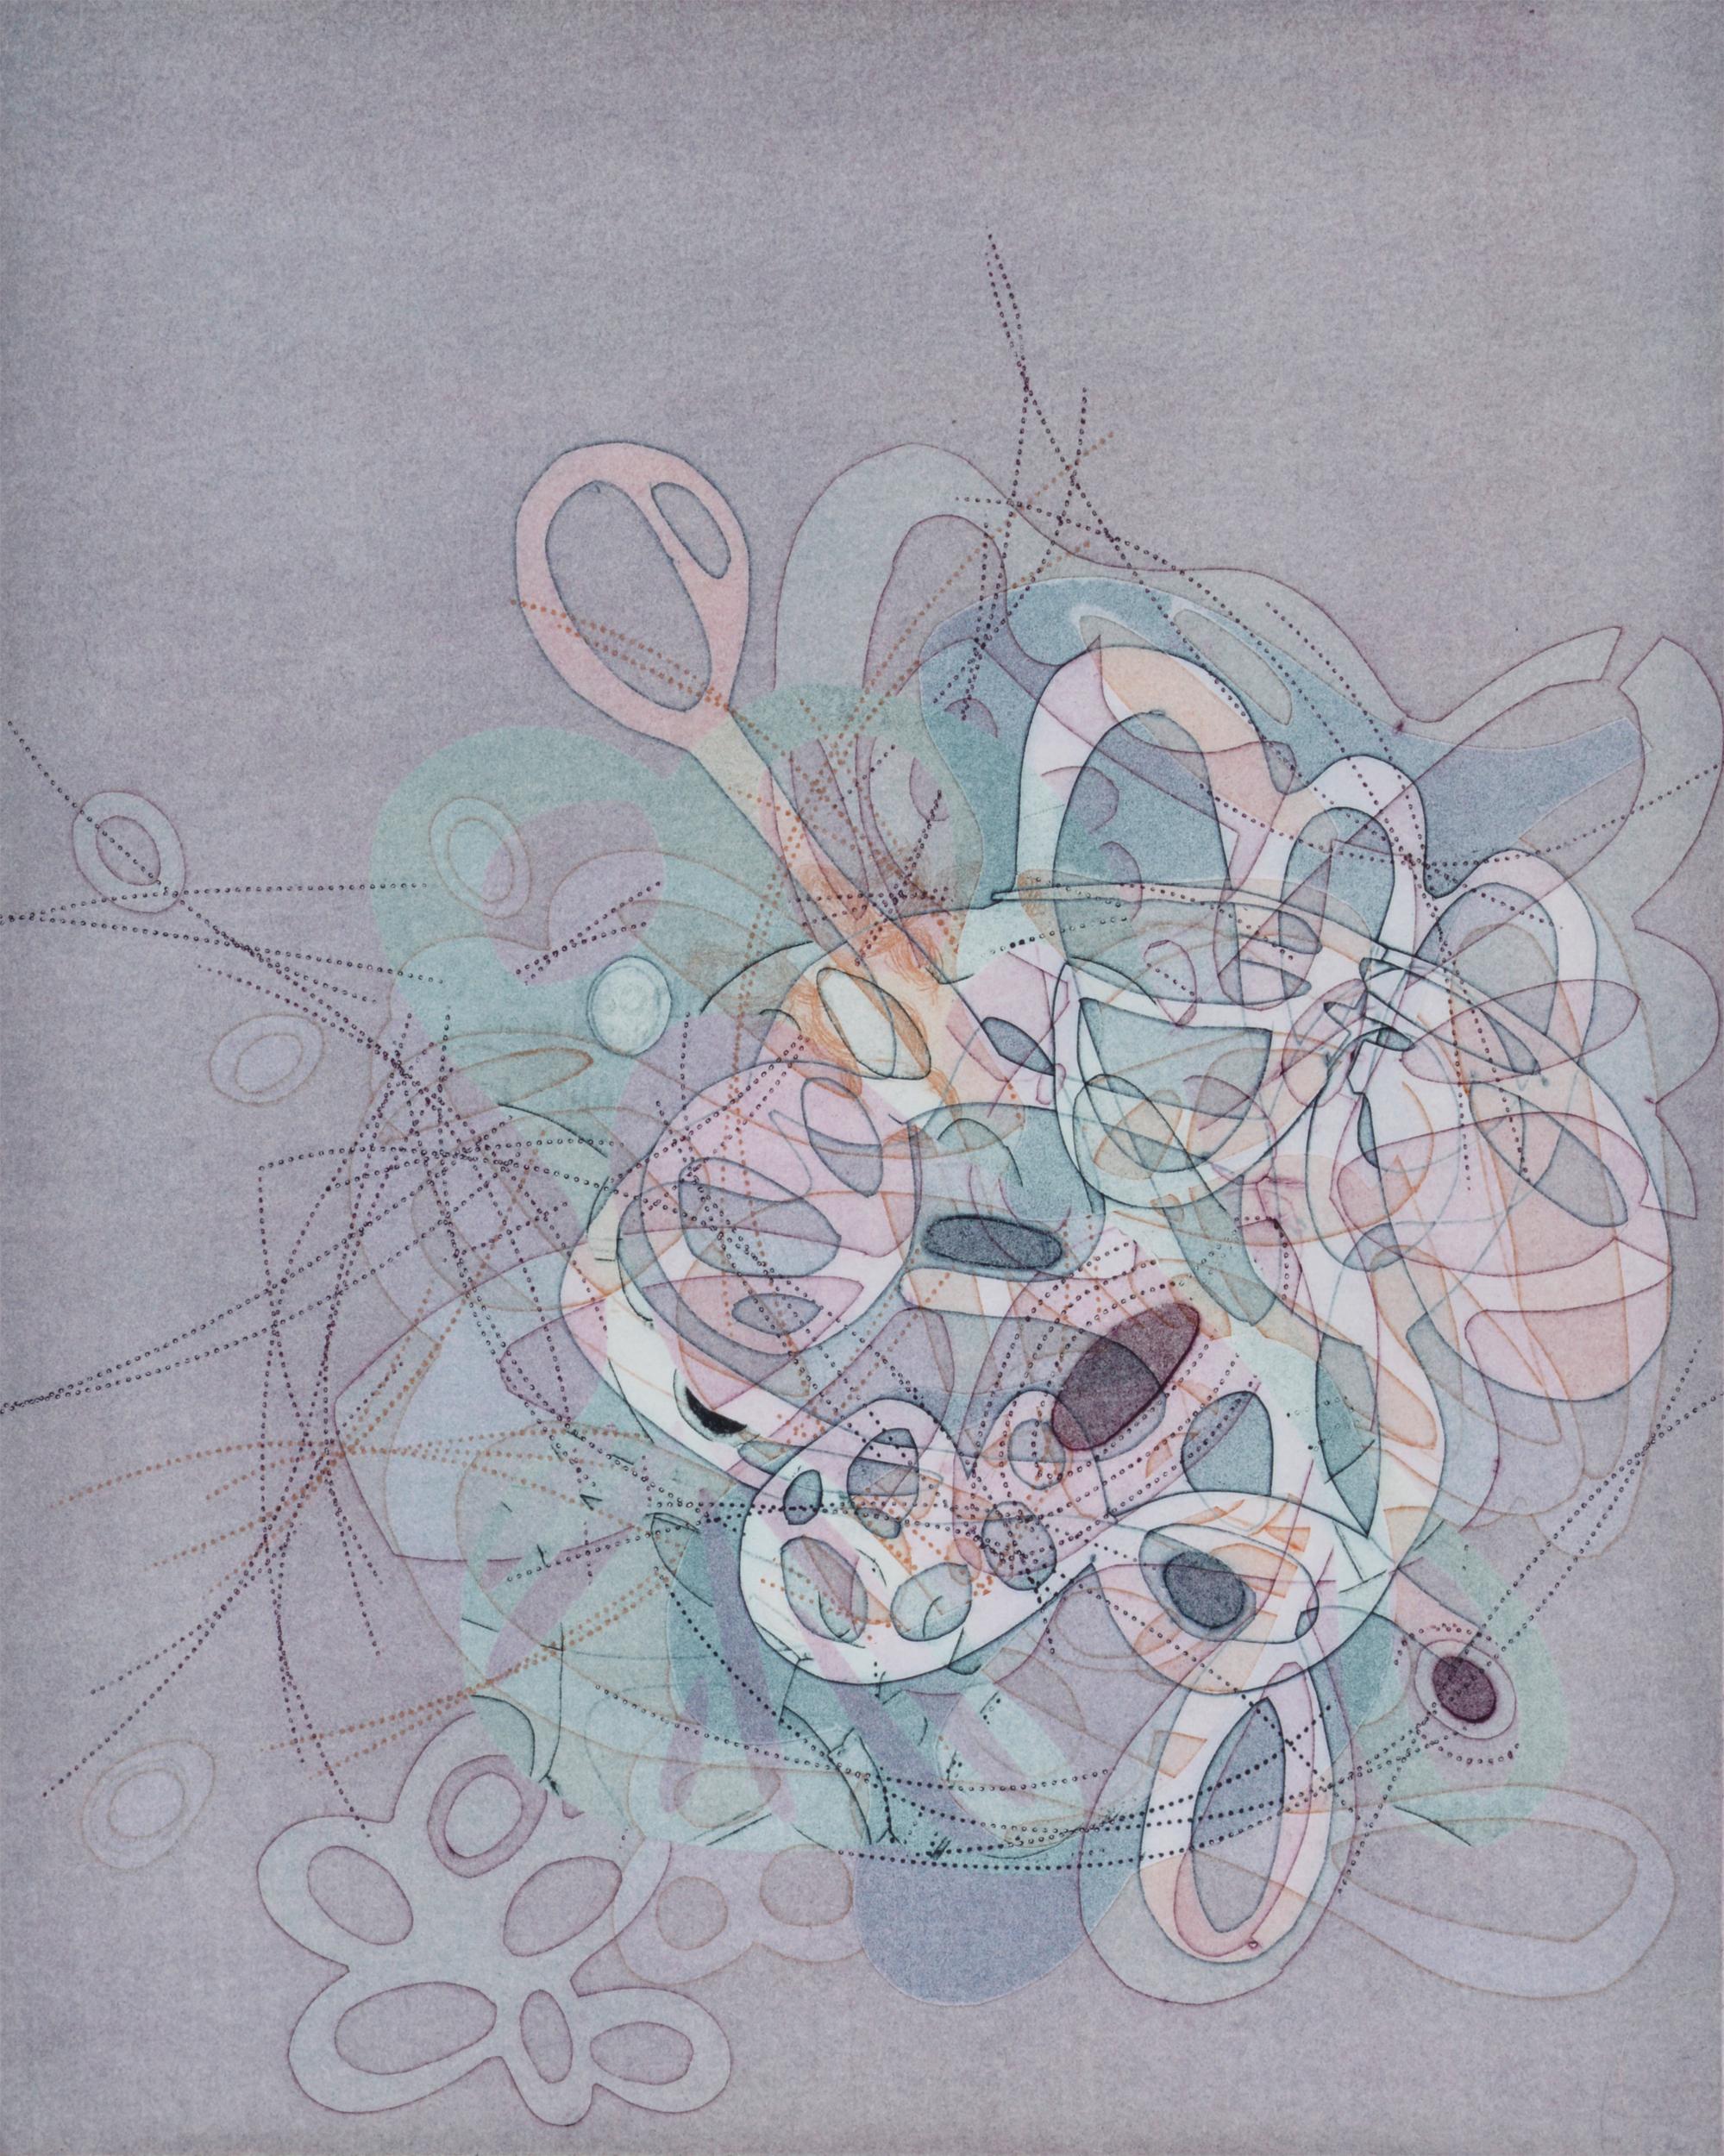 Taiko Chandler Abstract Print - "On and On #18", delicate pastel colored organic, curvy abstract monoprint